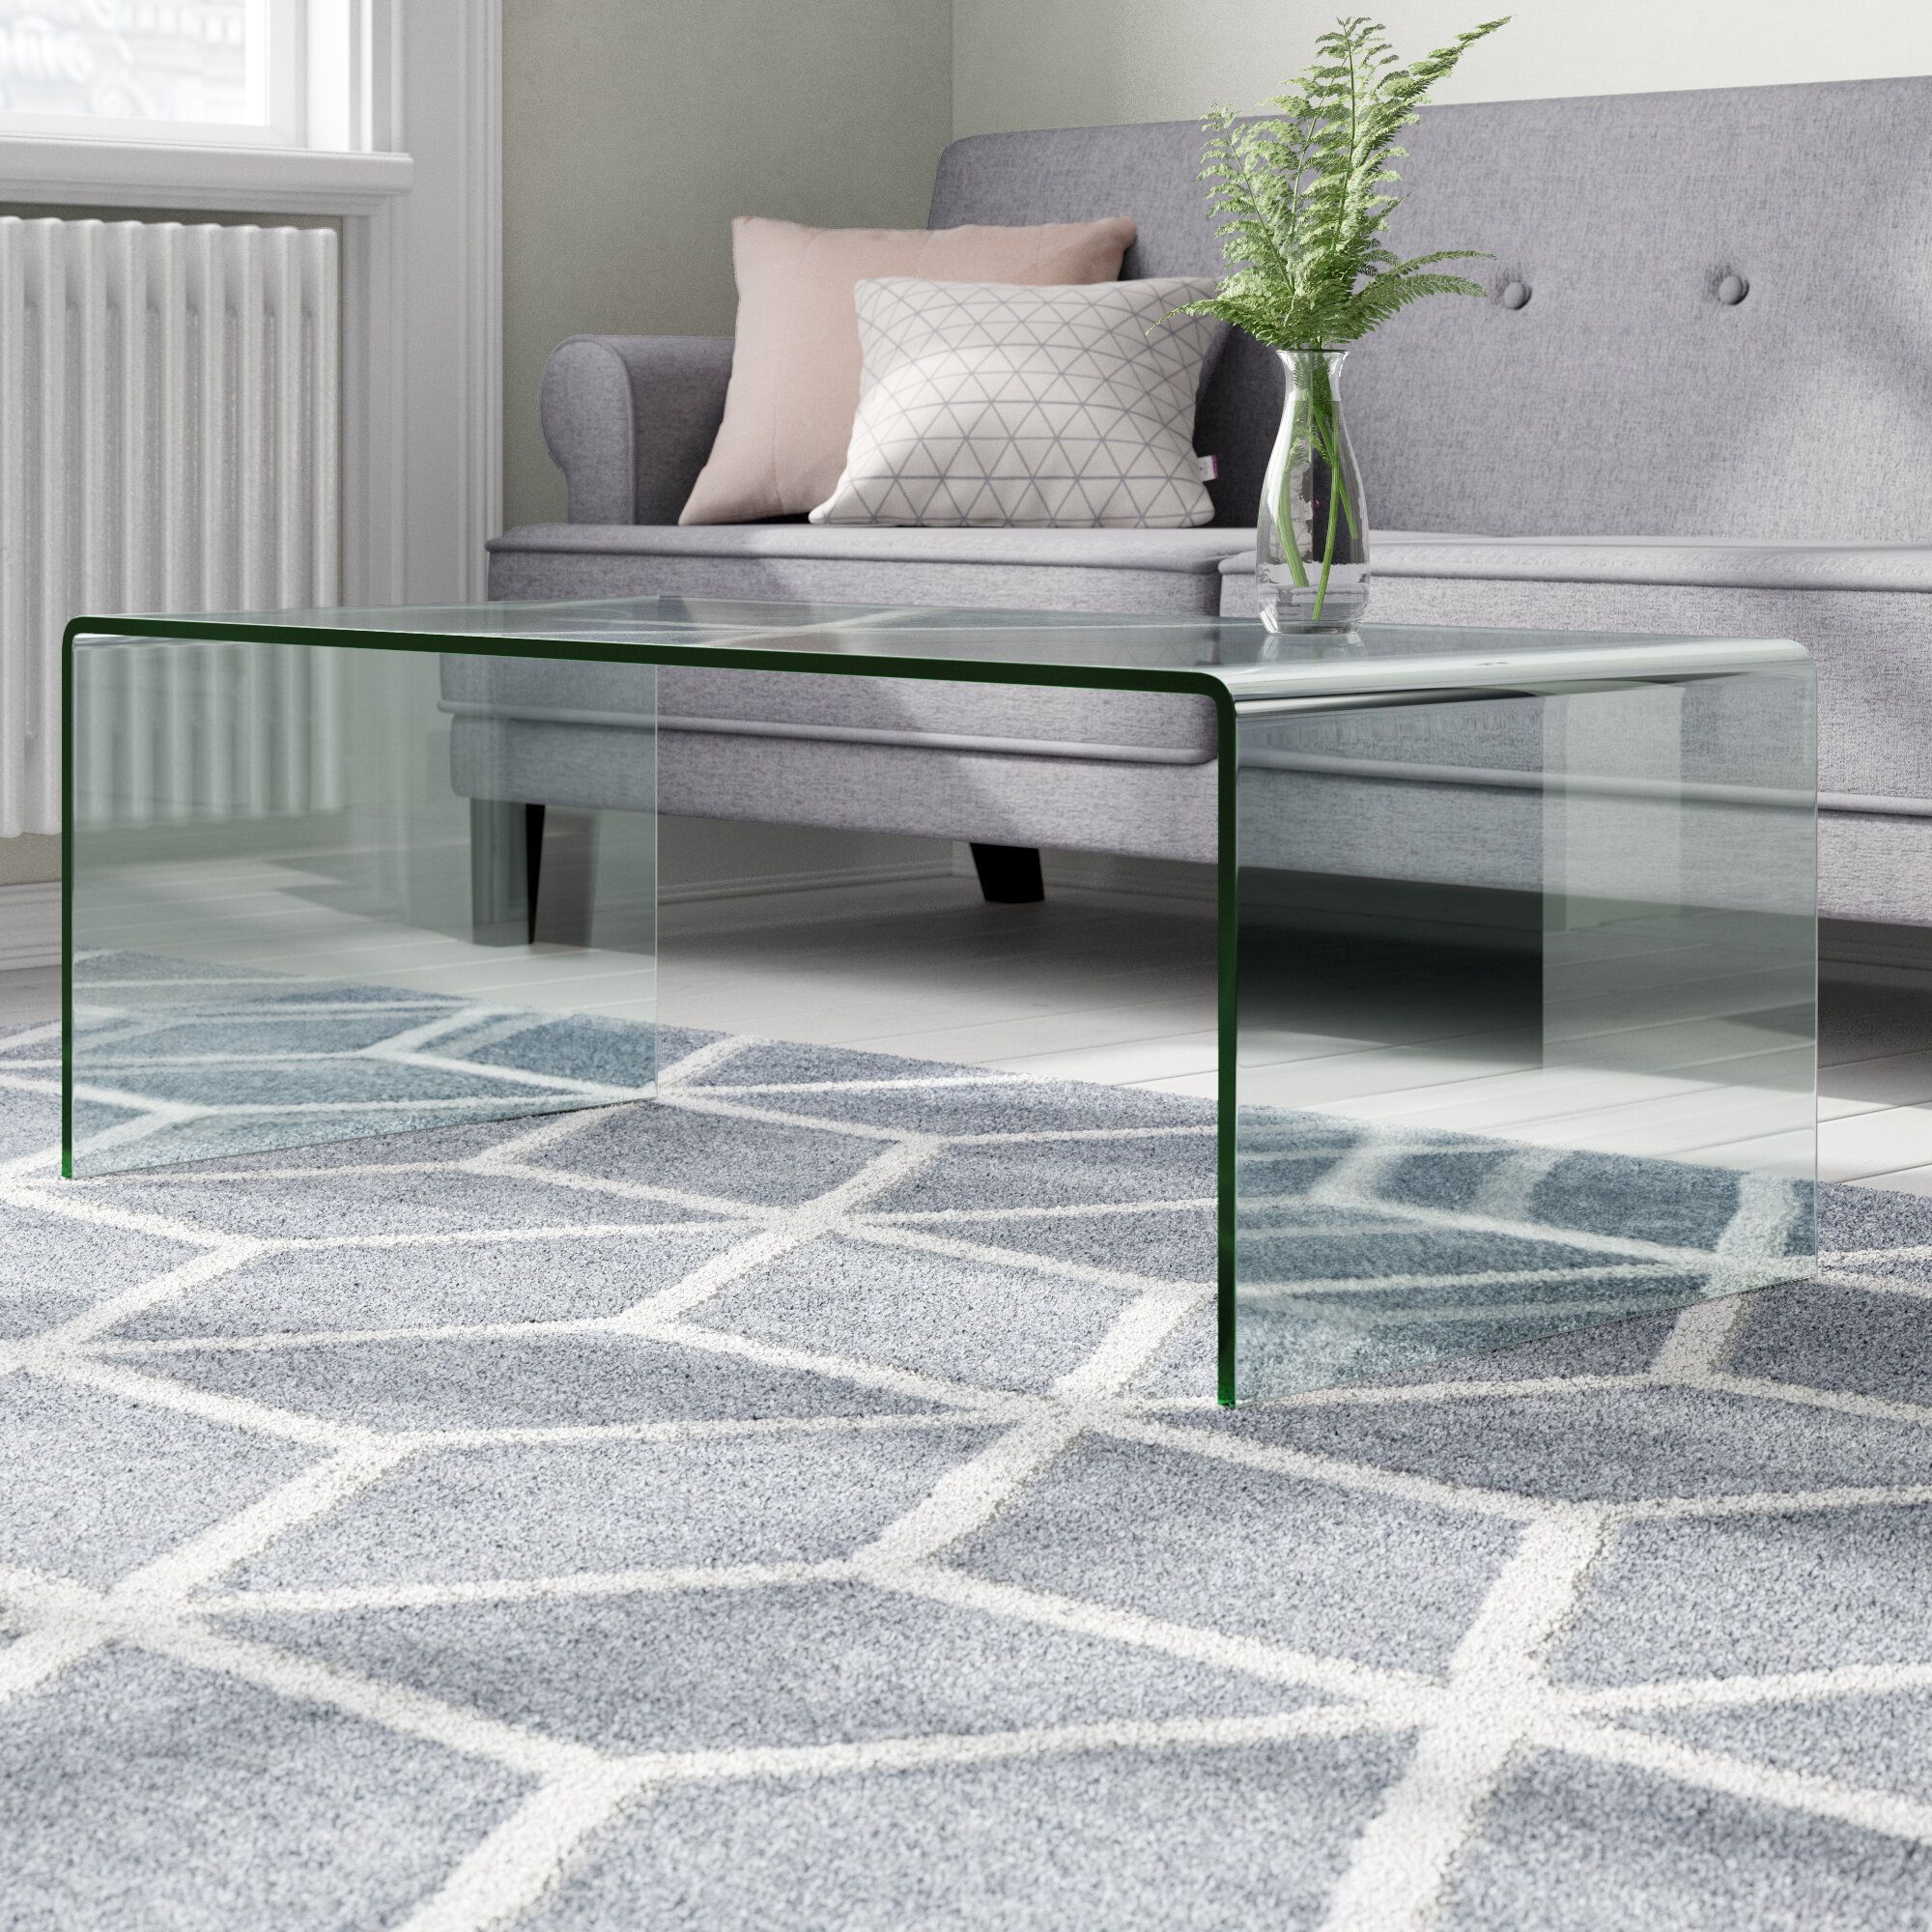 Metro Lane Curved Clear Glass Coffee Table & Reviews | Wayfair.co (View 6 of 15)